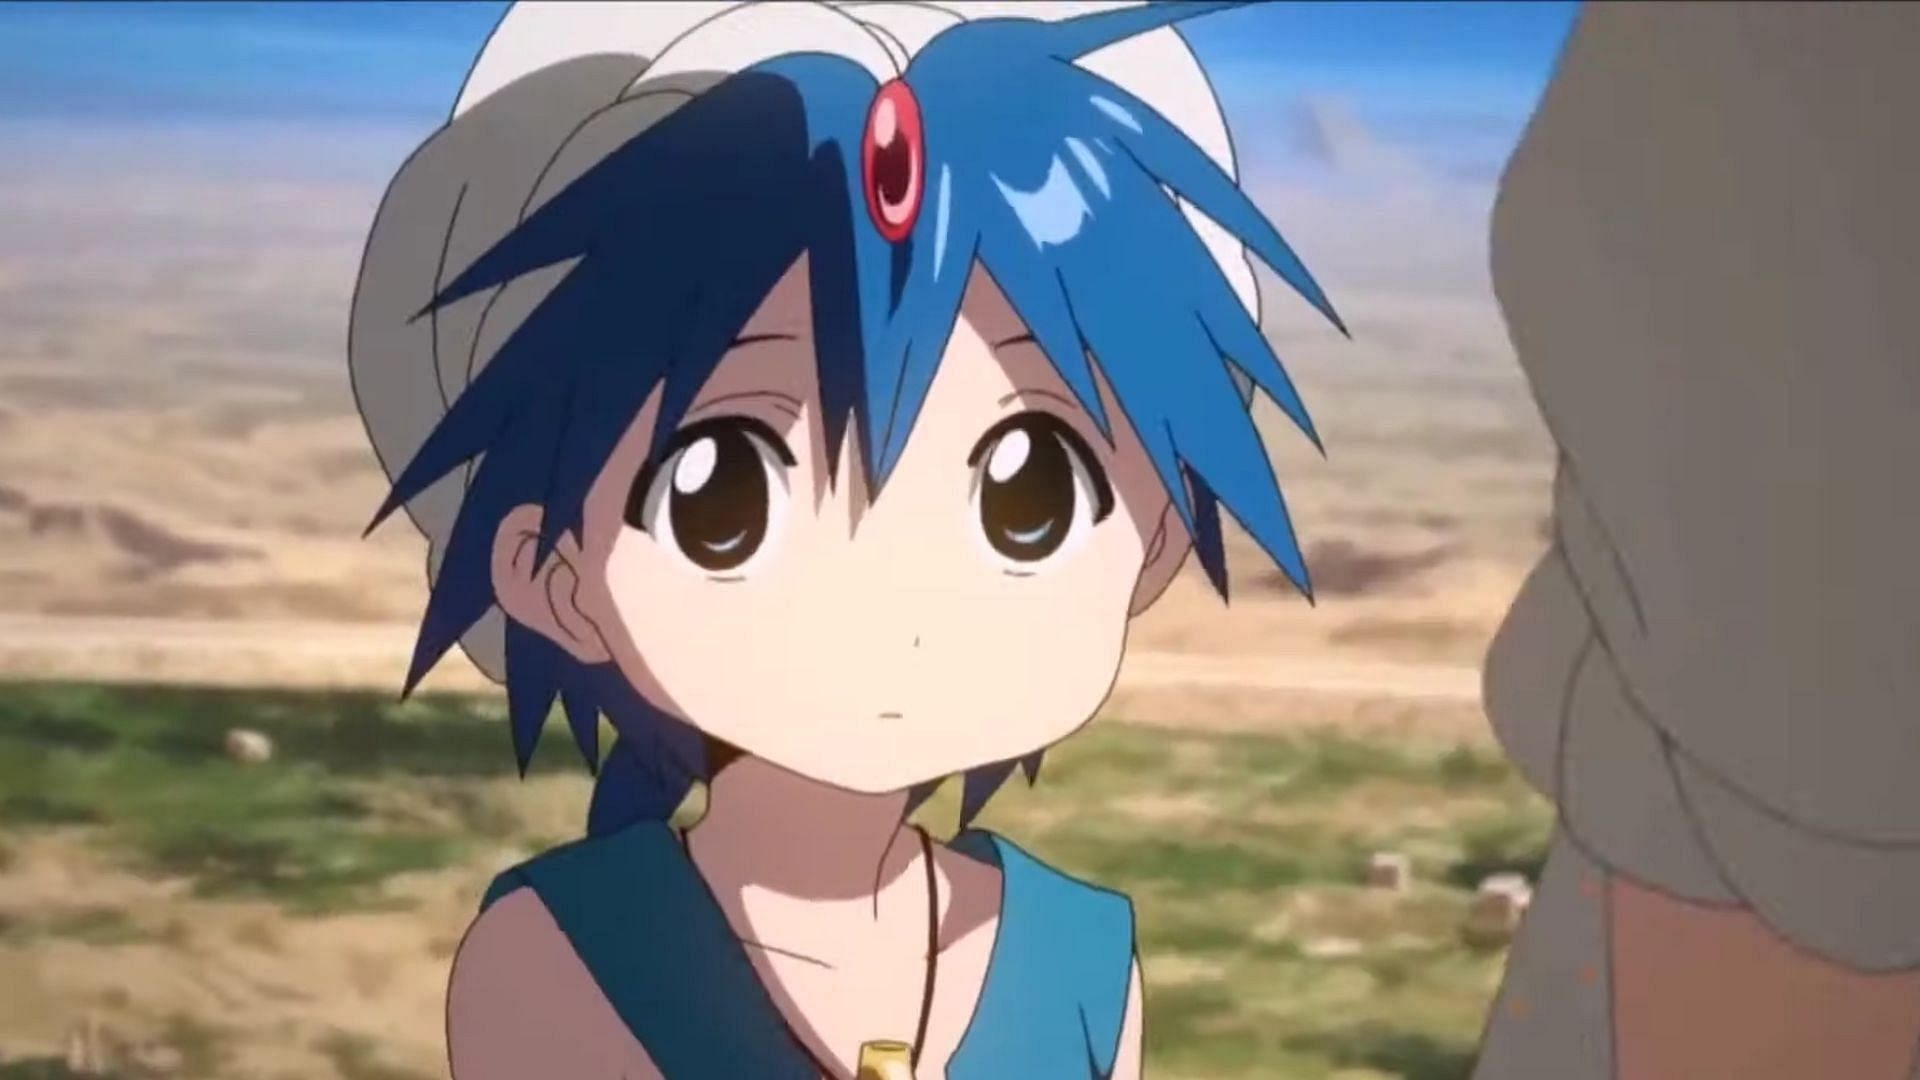 Aladdin the young boy with magical powers in Magi: The Labyrinth of Magic (Image via A1 Pictures)